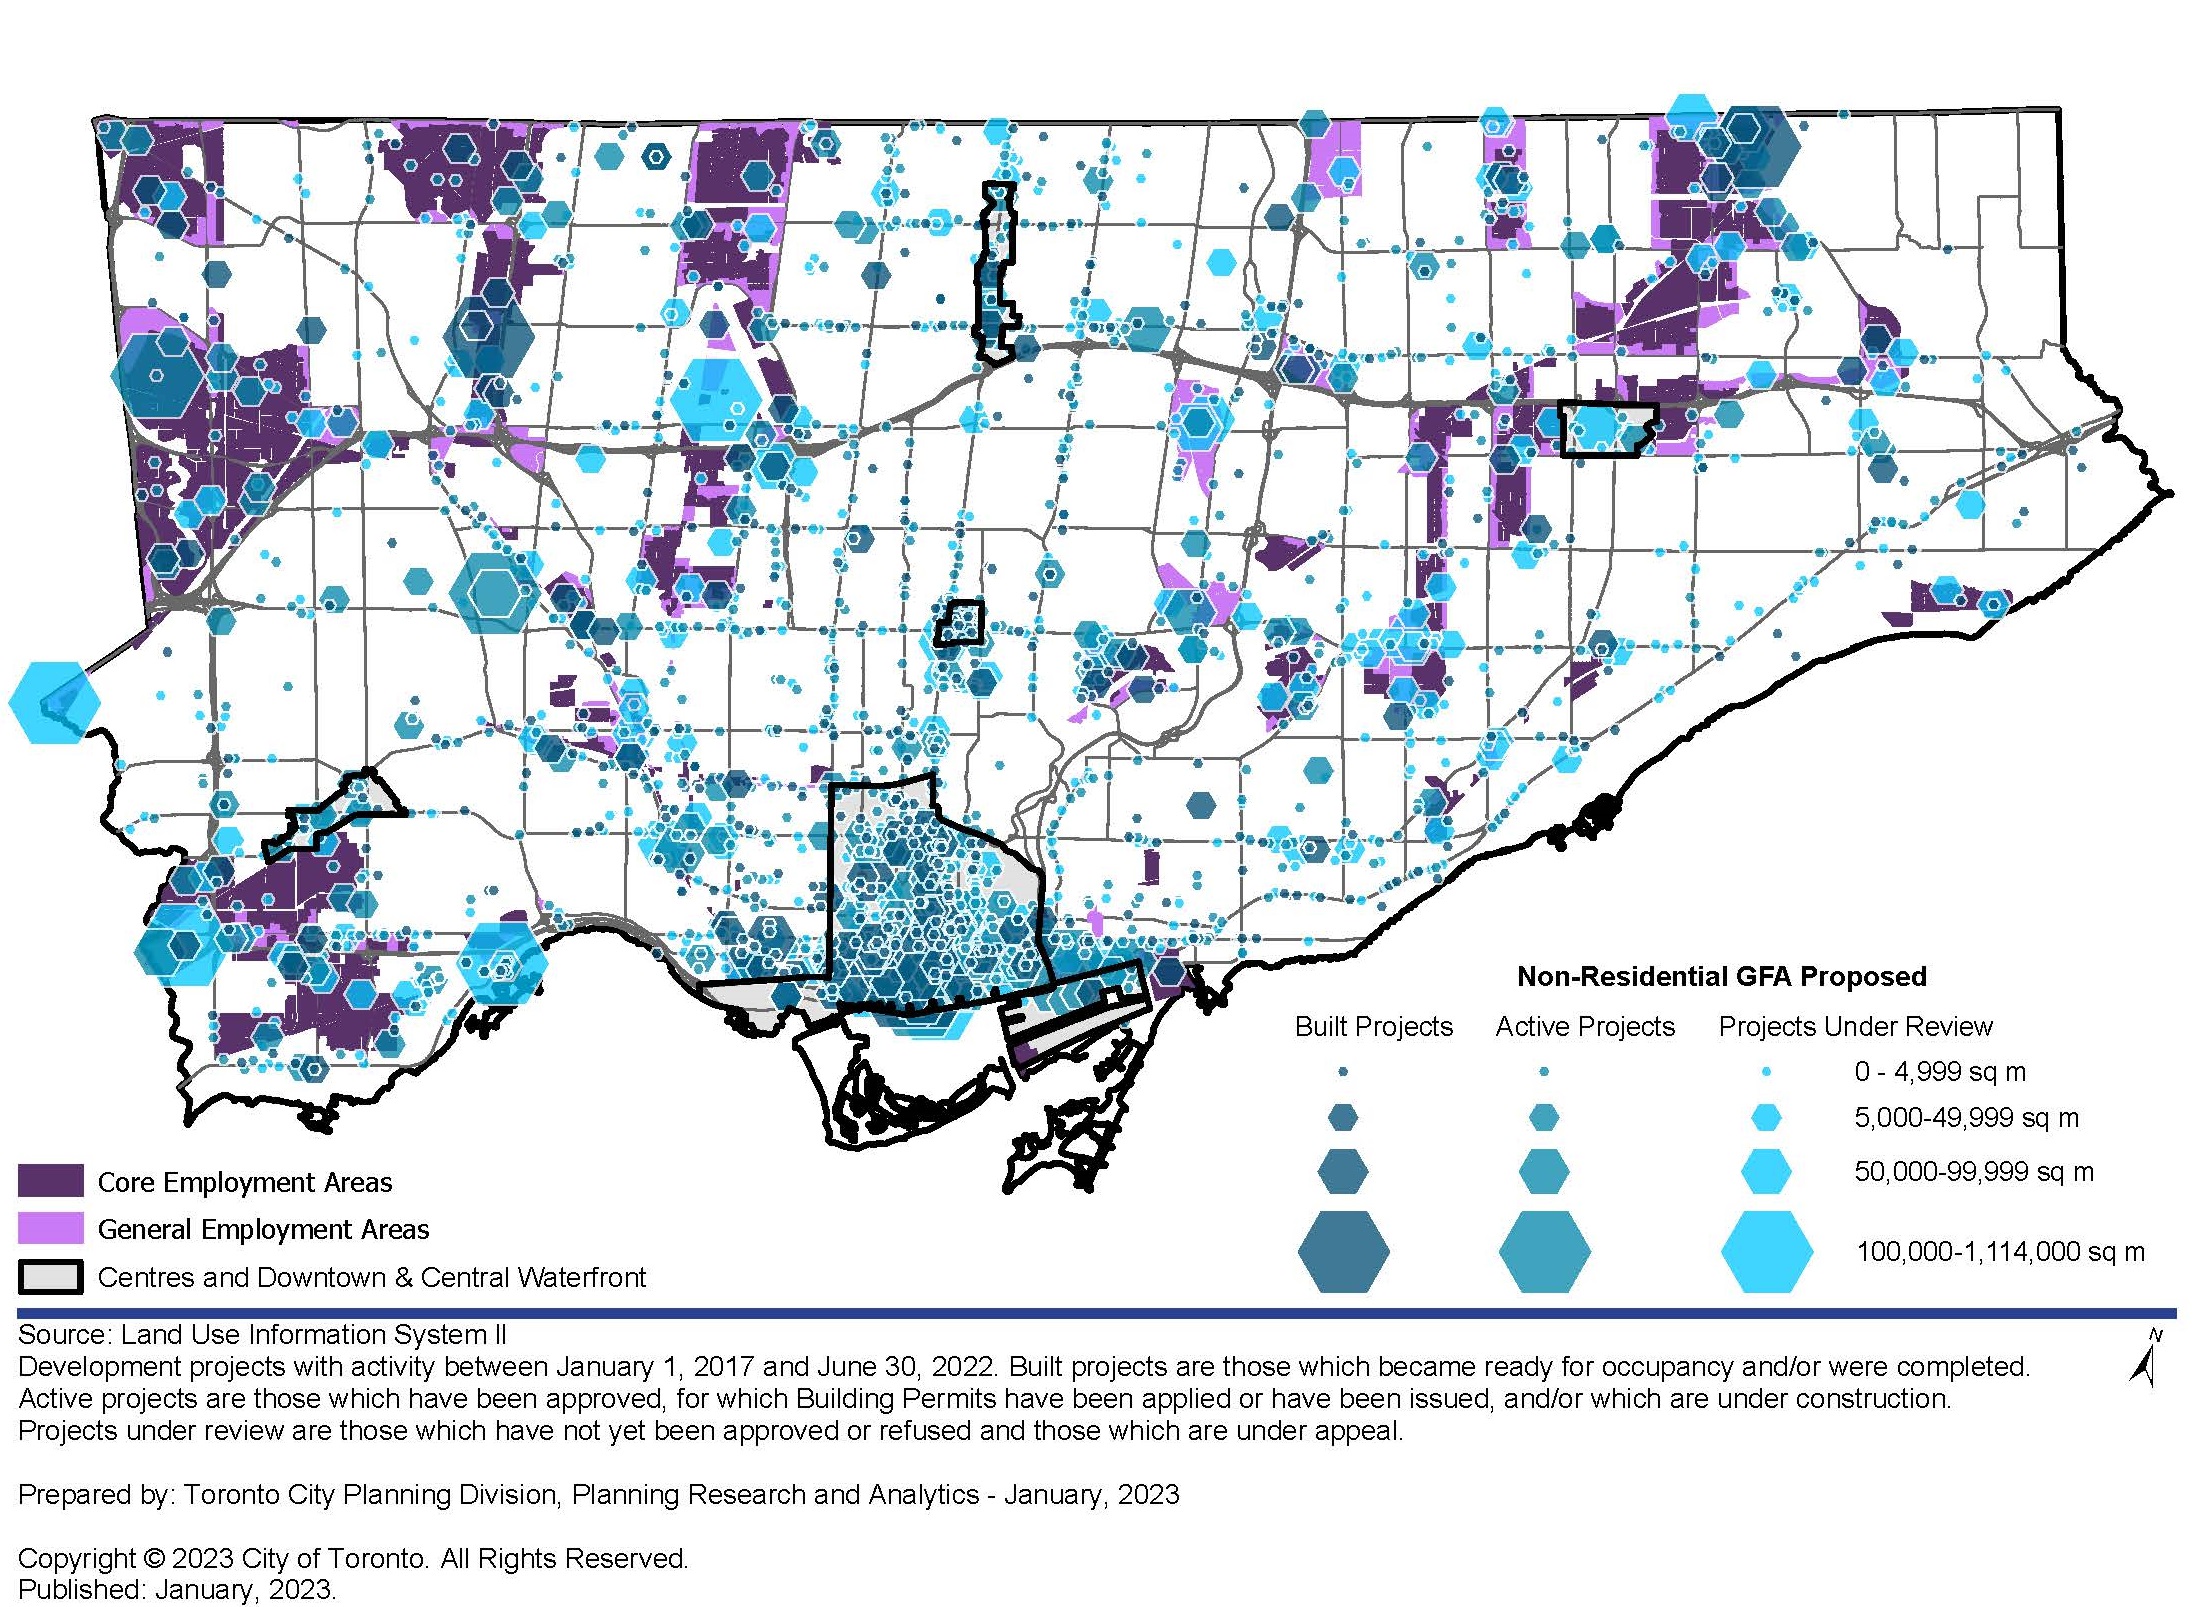 This map shows non-residential projects as graduated hexagons with their size based on the amount of non-residential GFA they propose. Source: City of Toronto, City Planning Division, Land Use Information System II. For more information, contact Hailey Toft at 416-392-9787 or hailey.toft@toronto.ca.